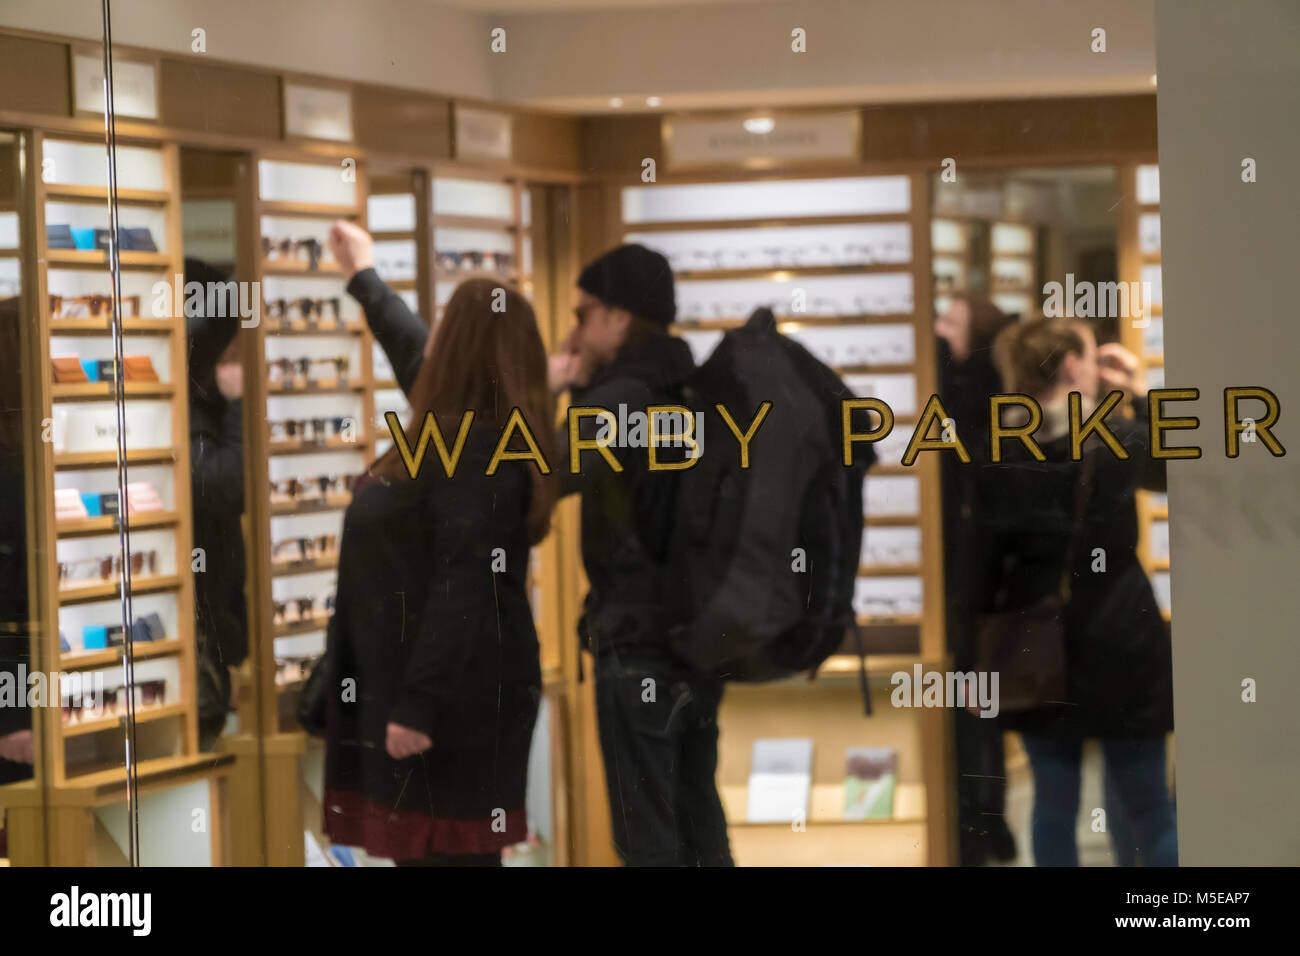 Customers in the Warby Parker eyeglasses store in Grand Central Terminal in New York on Friday, February 16, 2018. Warby Parker announced it plans to reach 100 stores this year up from the 64 it now operates. The eyeglass merchant is following in the footsteps of other e-commerce companies in finding that they need a physical presence to service and attract customers. (Â© Richard B. Levine) Stock Photo